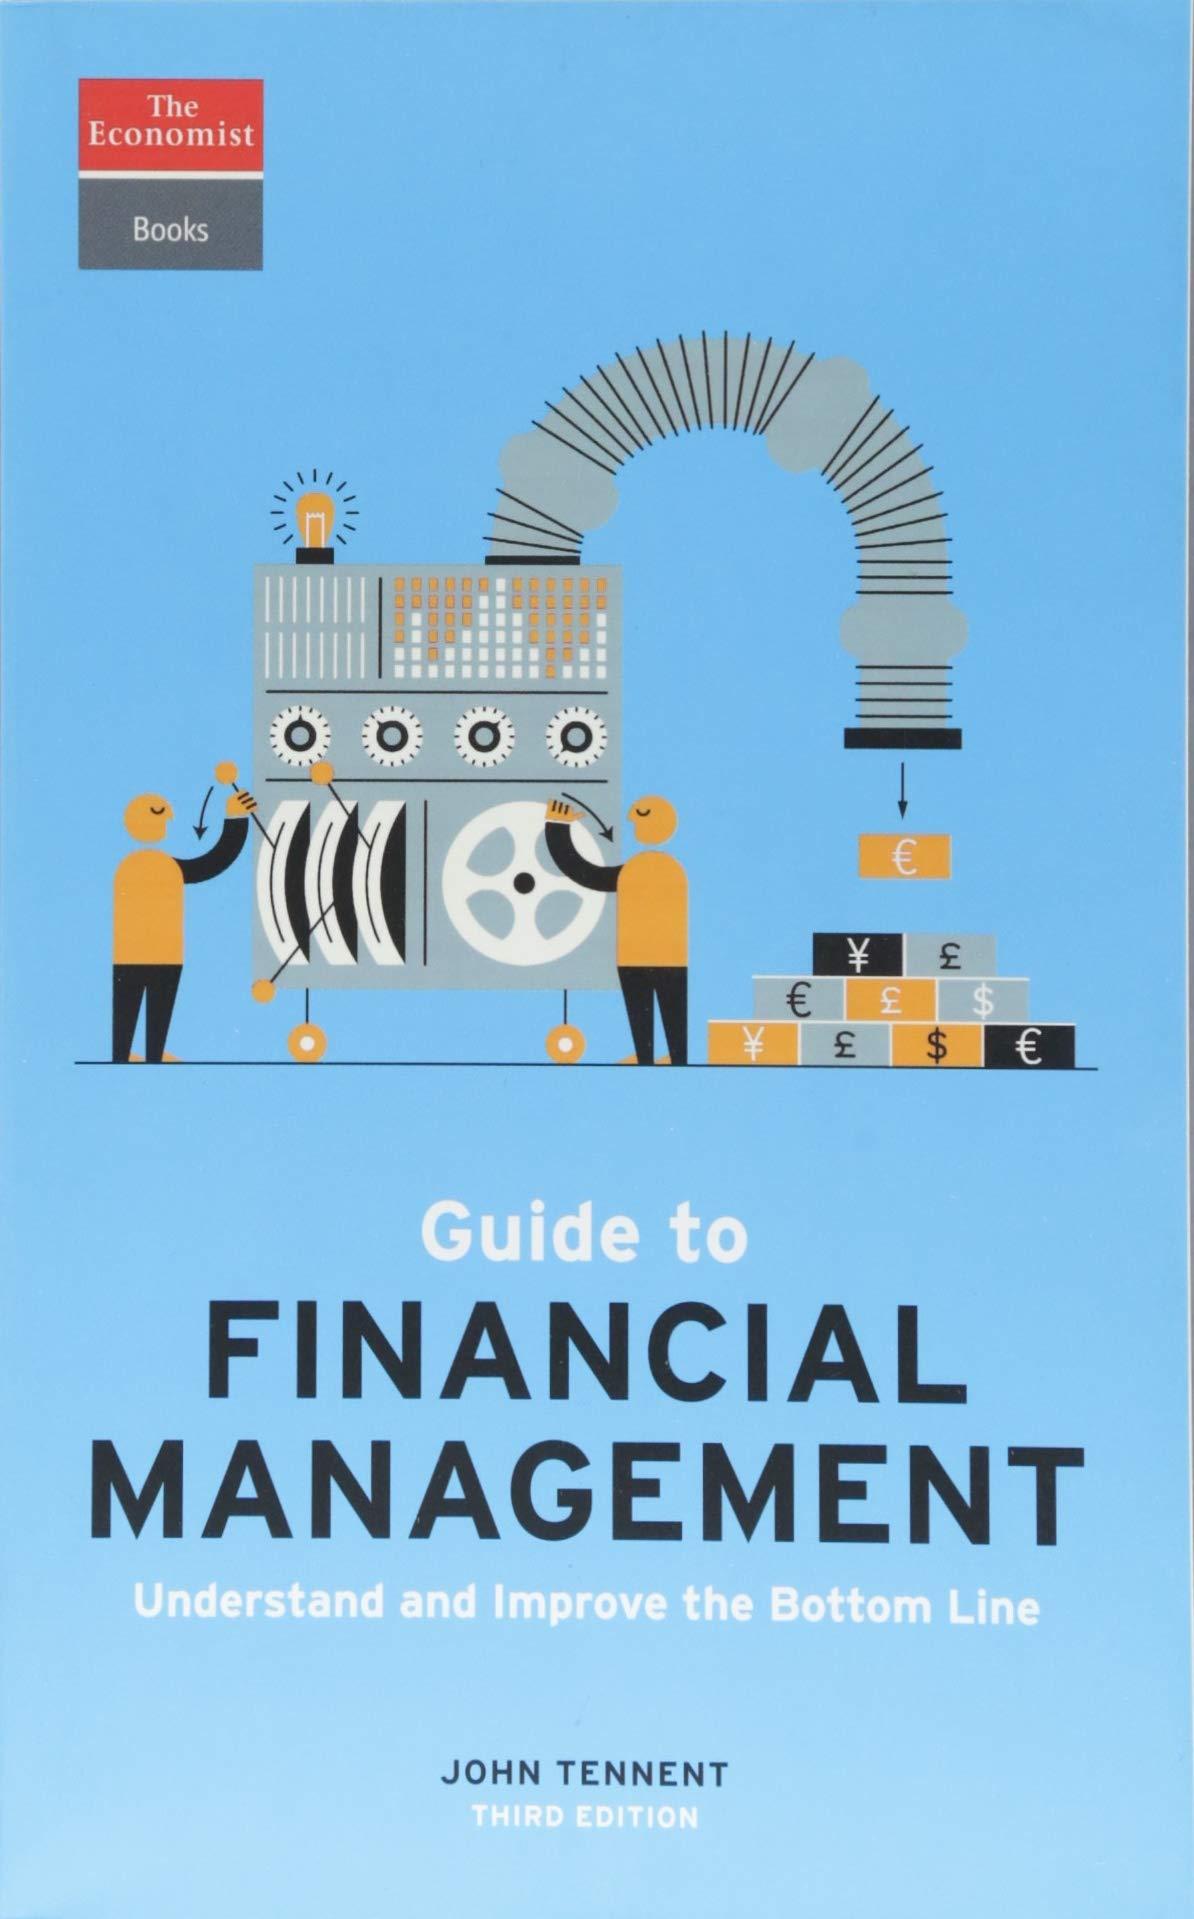 guide to financial management understand and improve the bottom line 1st edition the economist, john tennent